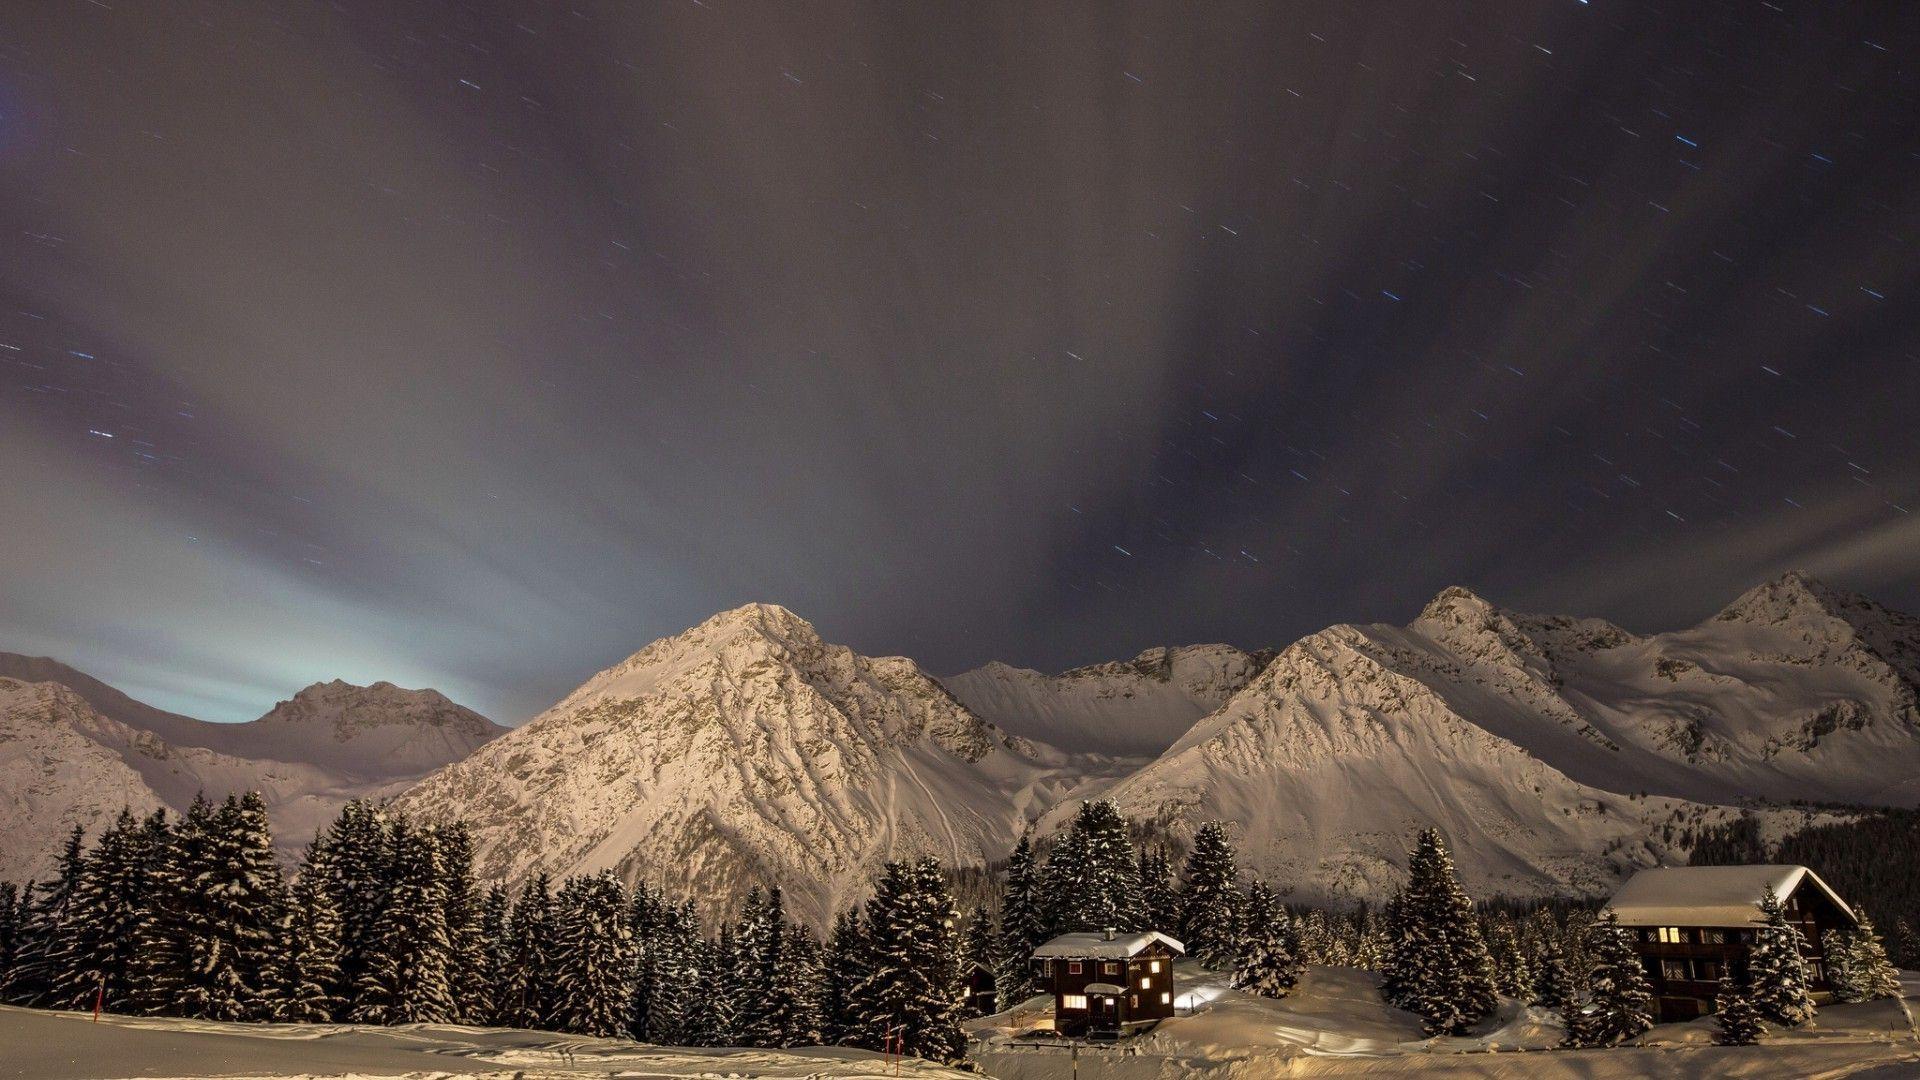 Night, mountains, glow, house, snow. Android wallpaper for free